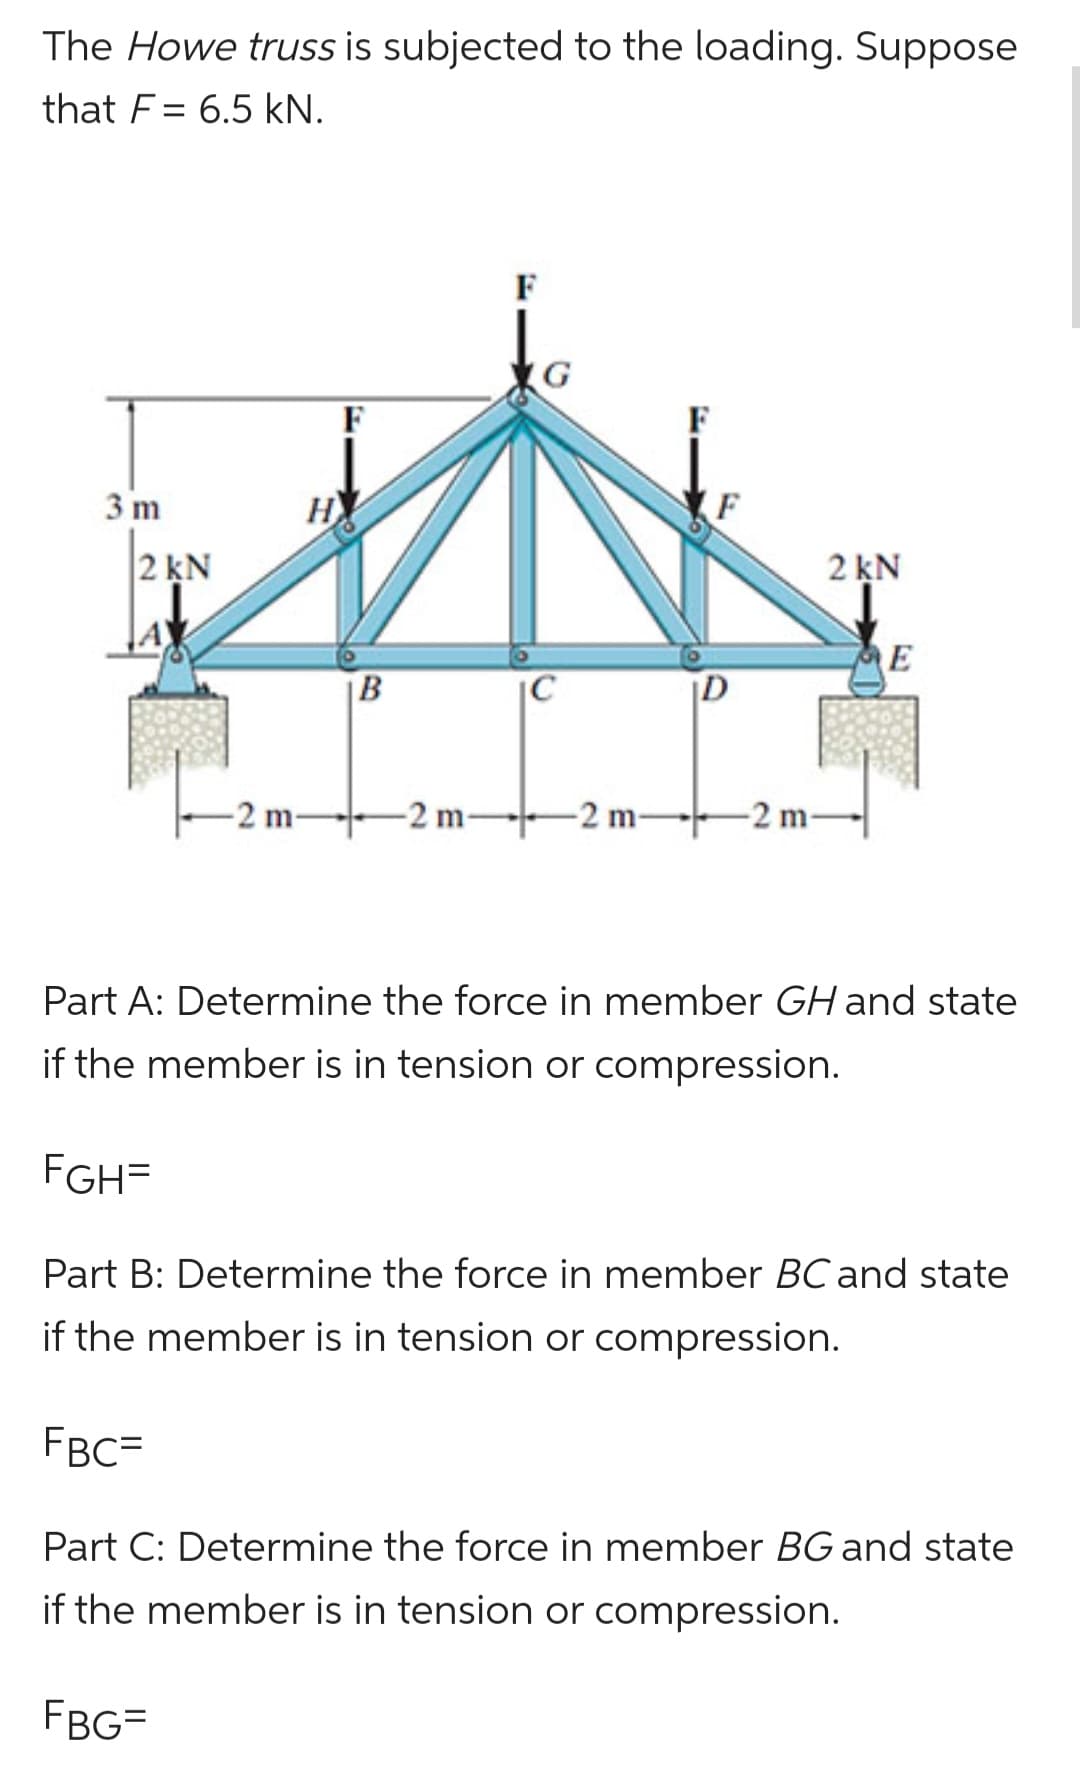 The Howe truss is subjected to the loading. Suppose
that F 6.5 kN.
3 m
2 kN
A
H
FGH=
-2 m-
F
B
-2 m-
IC
-2 m-
F
D
-2 m-
2 kN
E
Part A: Determine the force in member GH and state
if the member is in tension or compression.
Part B: Determine the force in member BC and state
if the member is in tension or compression.
FBC=
Part C: Determine the force in member BG and state
if the member is in tension or compression.
FBG=